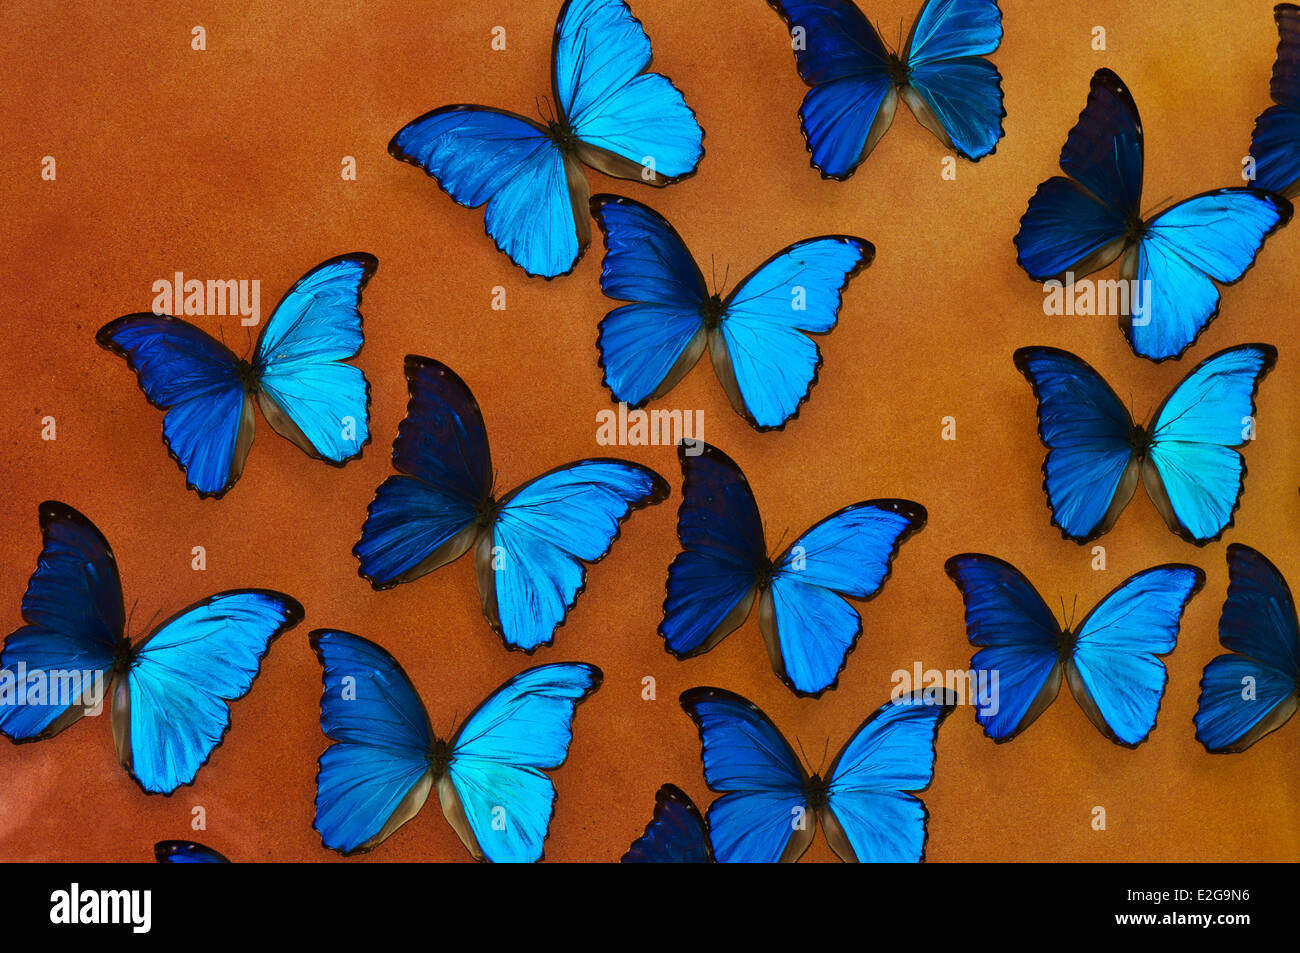 Background with many blue morpho ( morpho peleides) butterflies, top view Stock Photo